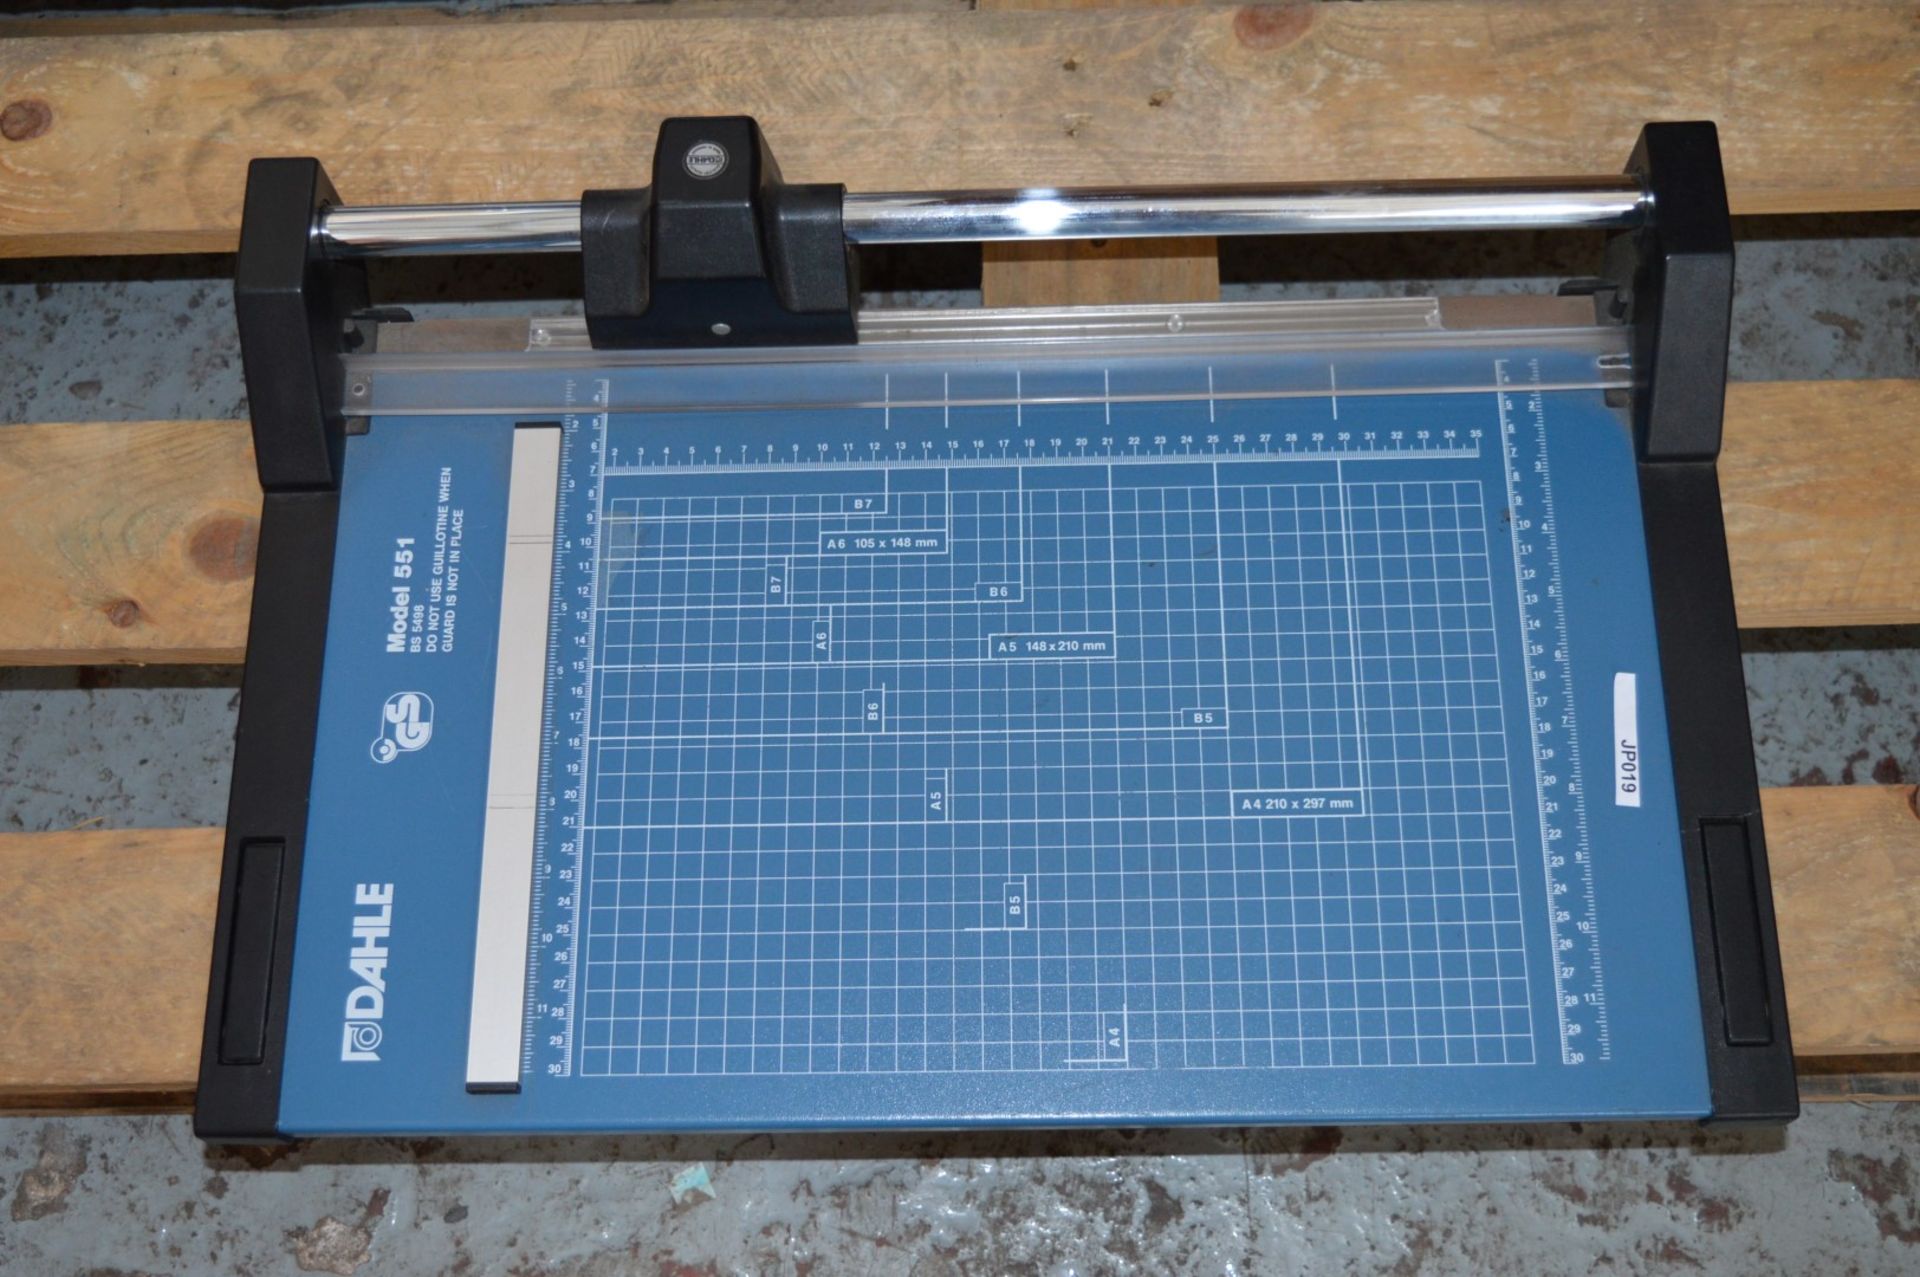 1 x Dahle Personal Paper Trimmer Cutter - Model 551 - Ideal For Arts and Crafts or Office Use - CL01